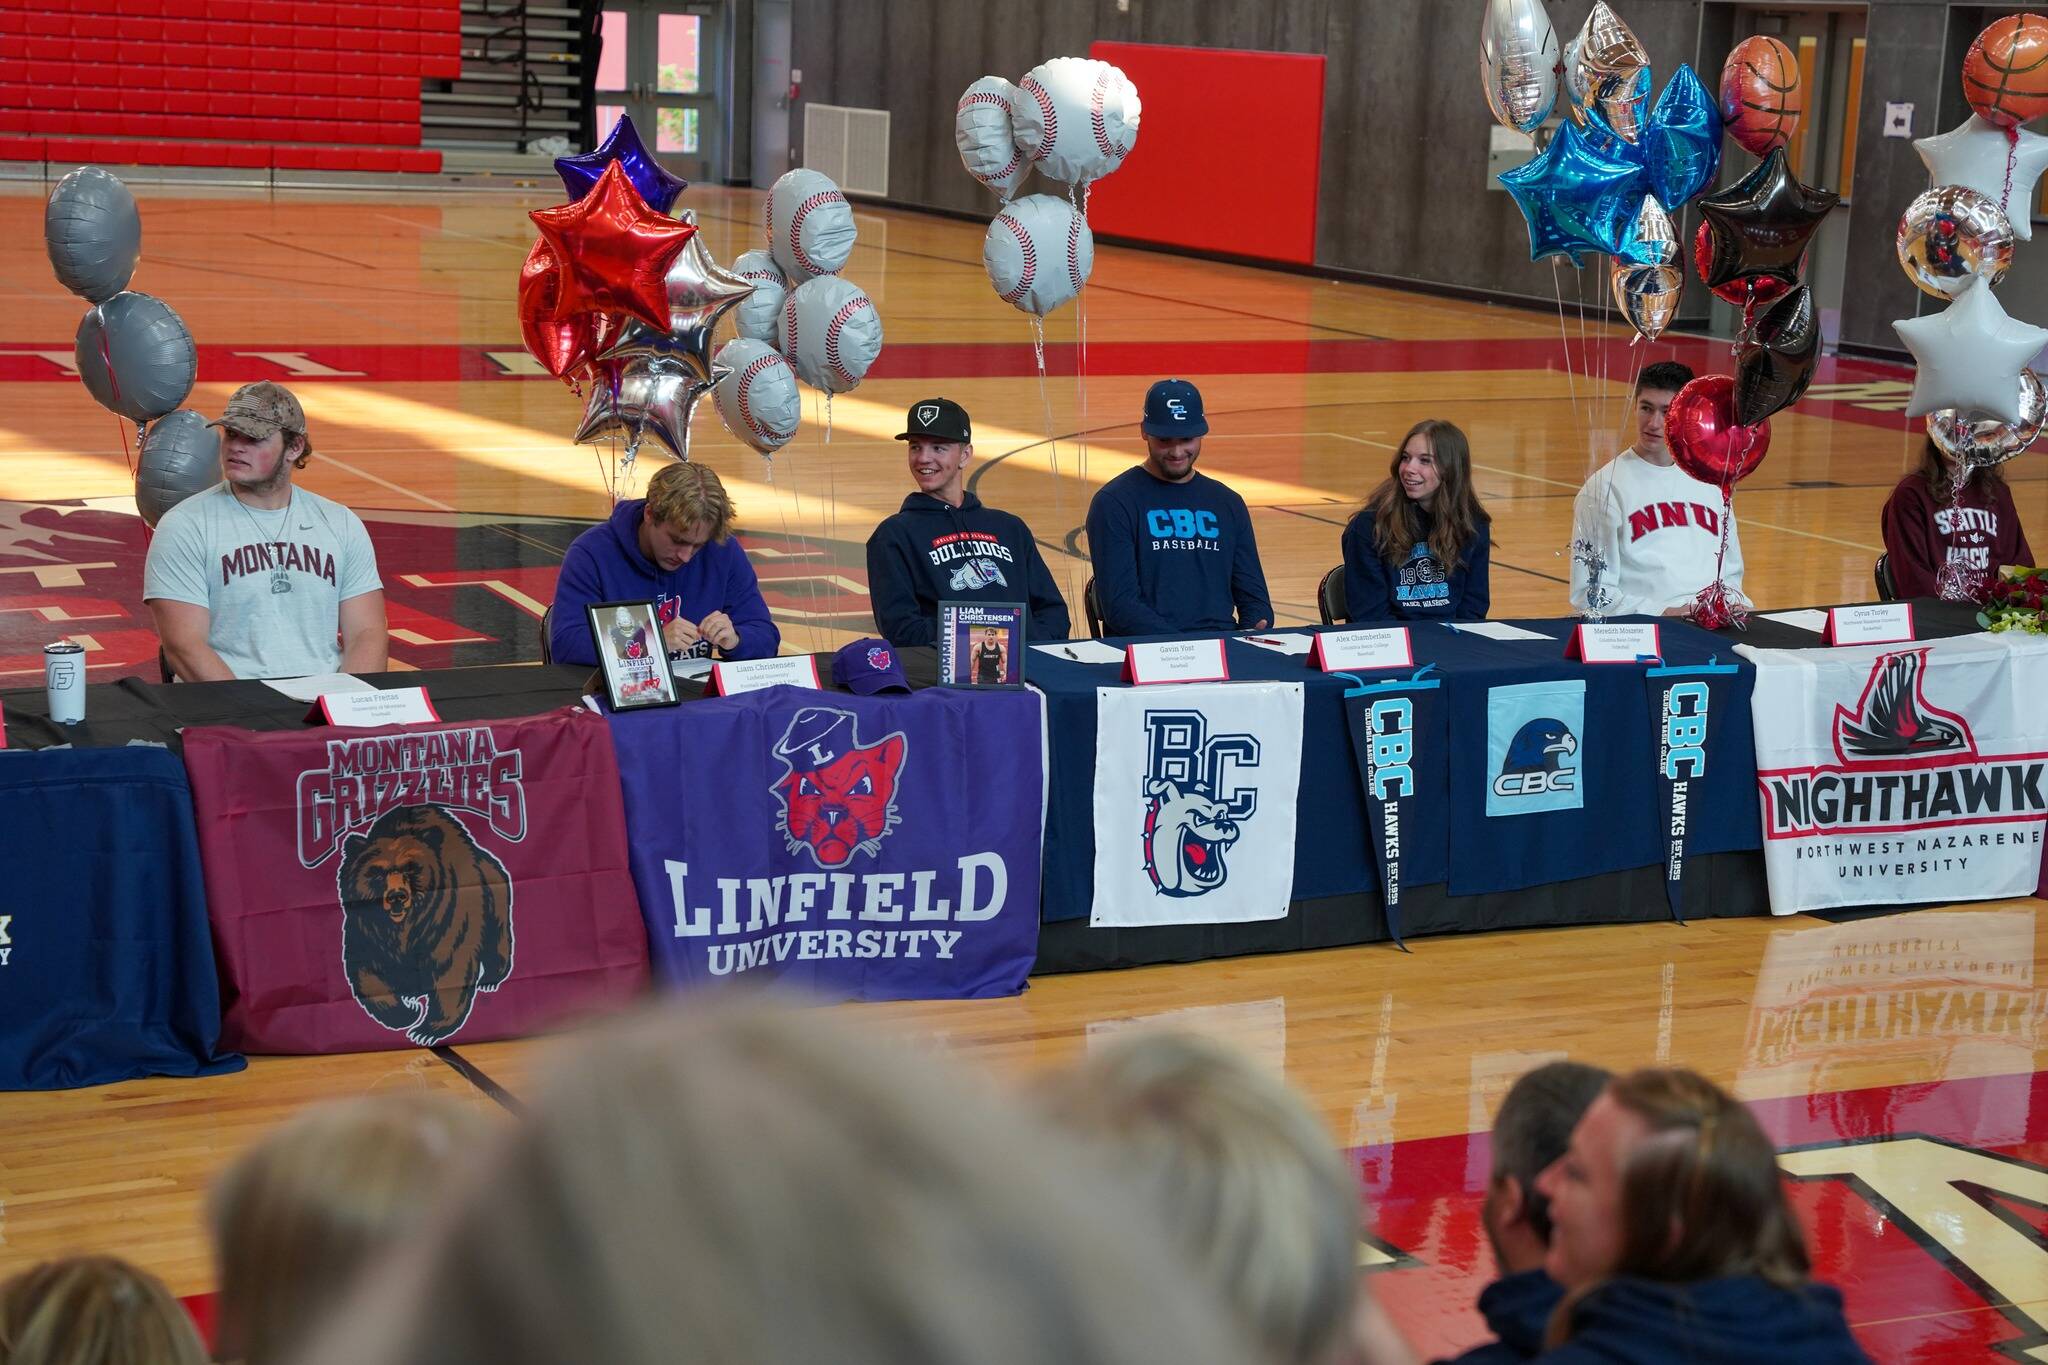 Mount Si student athletes are honored with a signing ceremony on May 17. All photos courtesy of the Snoqualmie Valley School District.